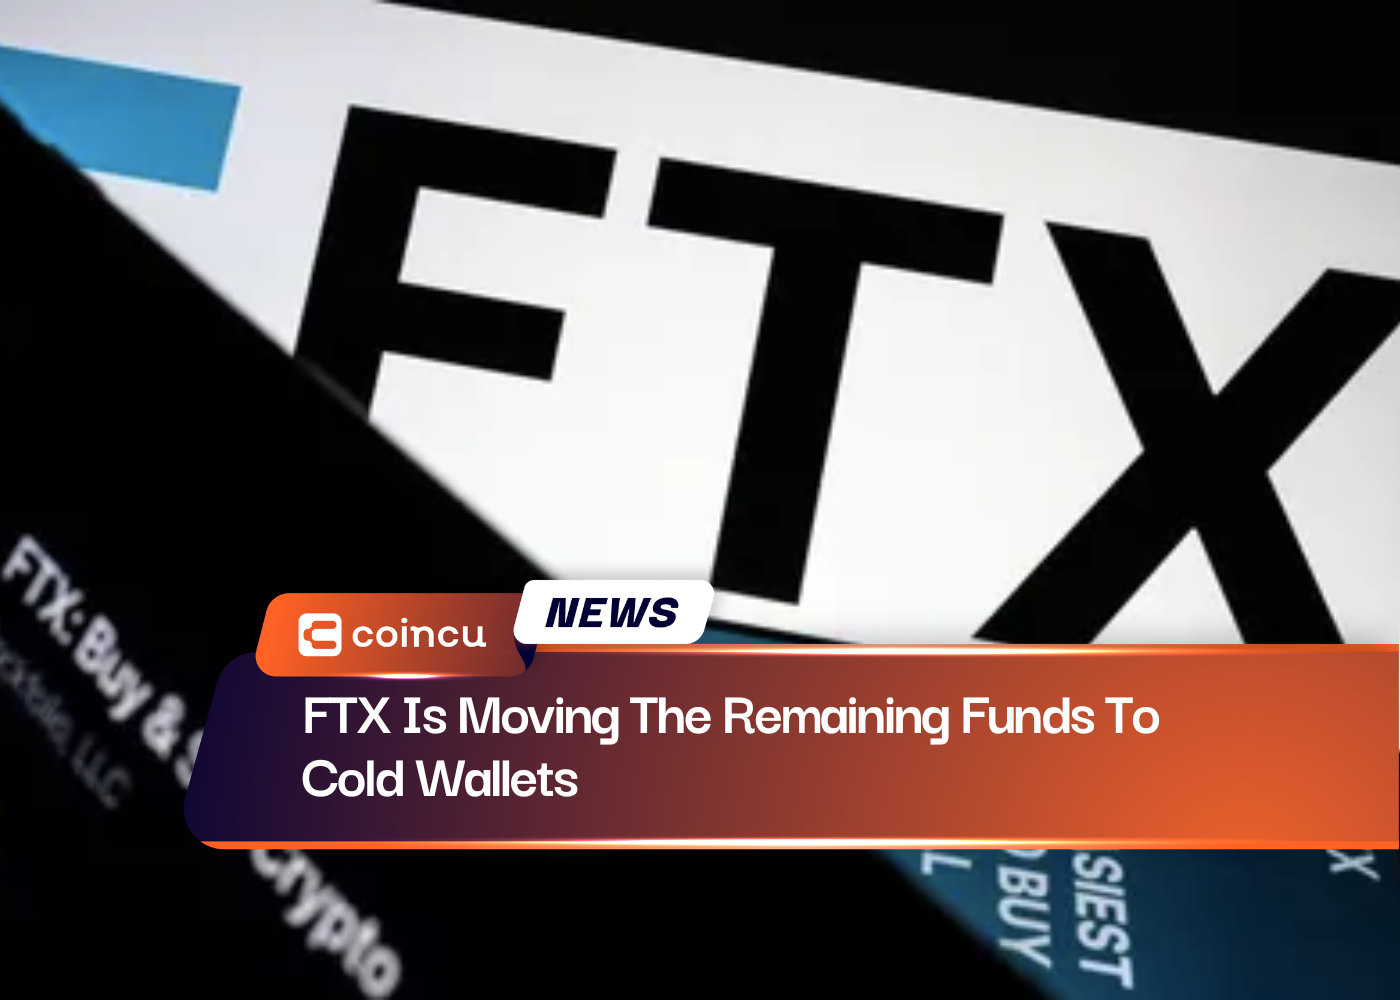 FTX Is Moving The Remaining Funds To Cold Wallets